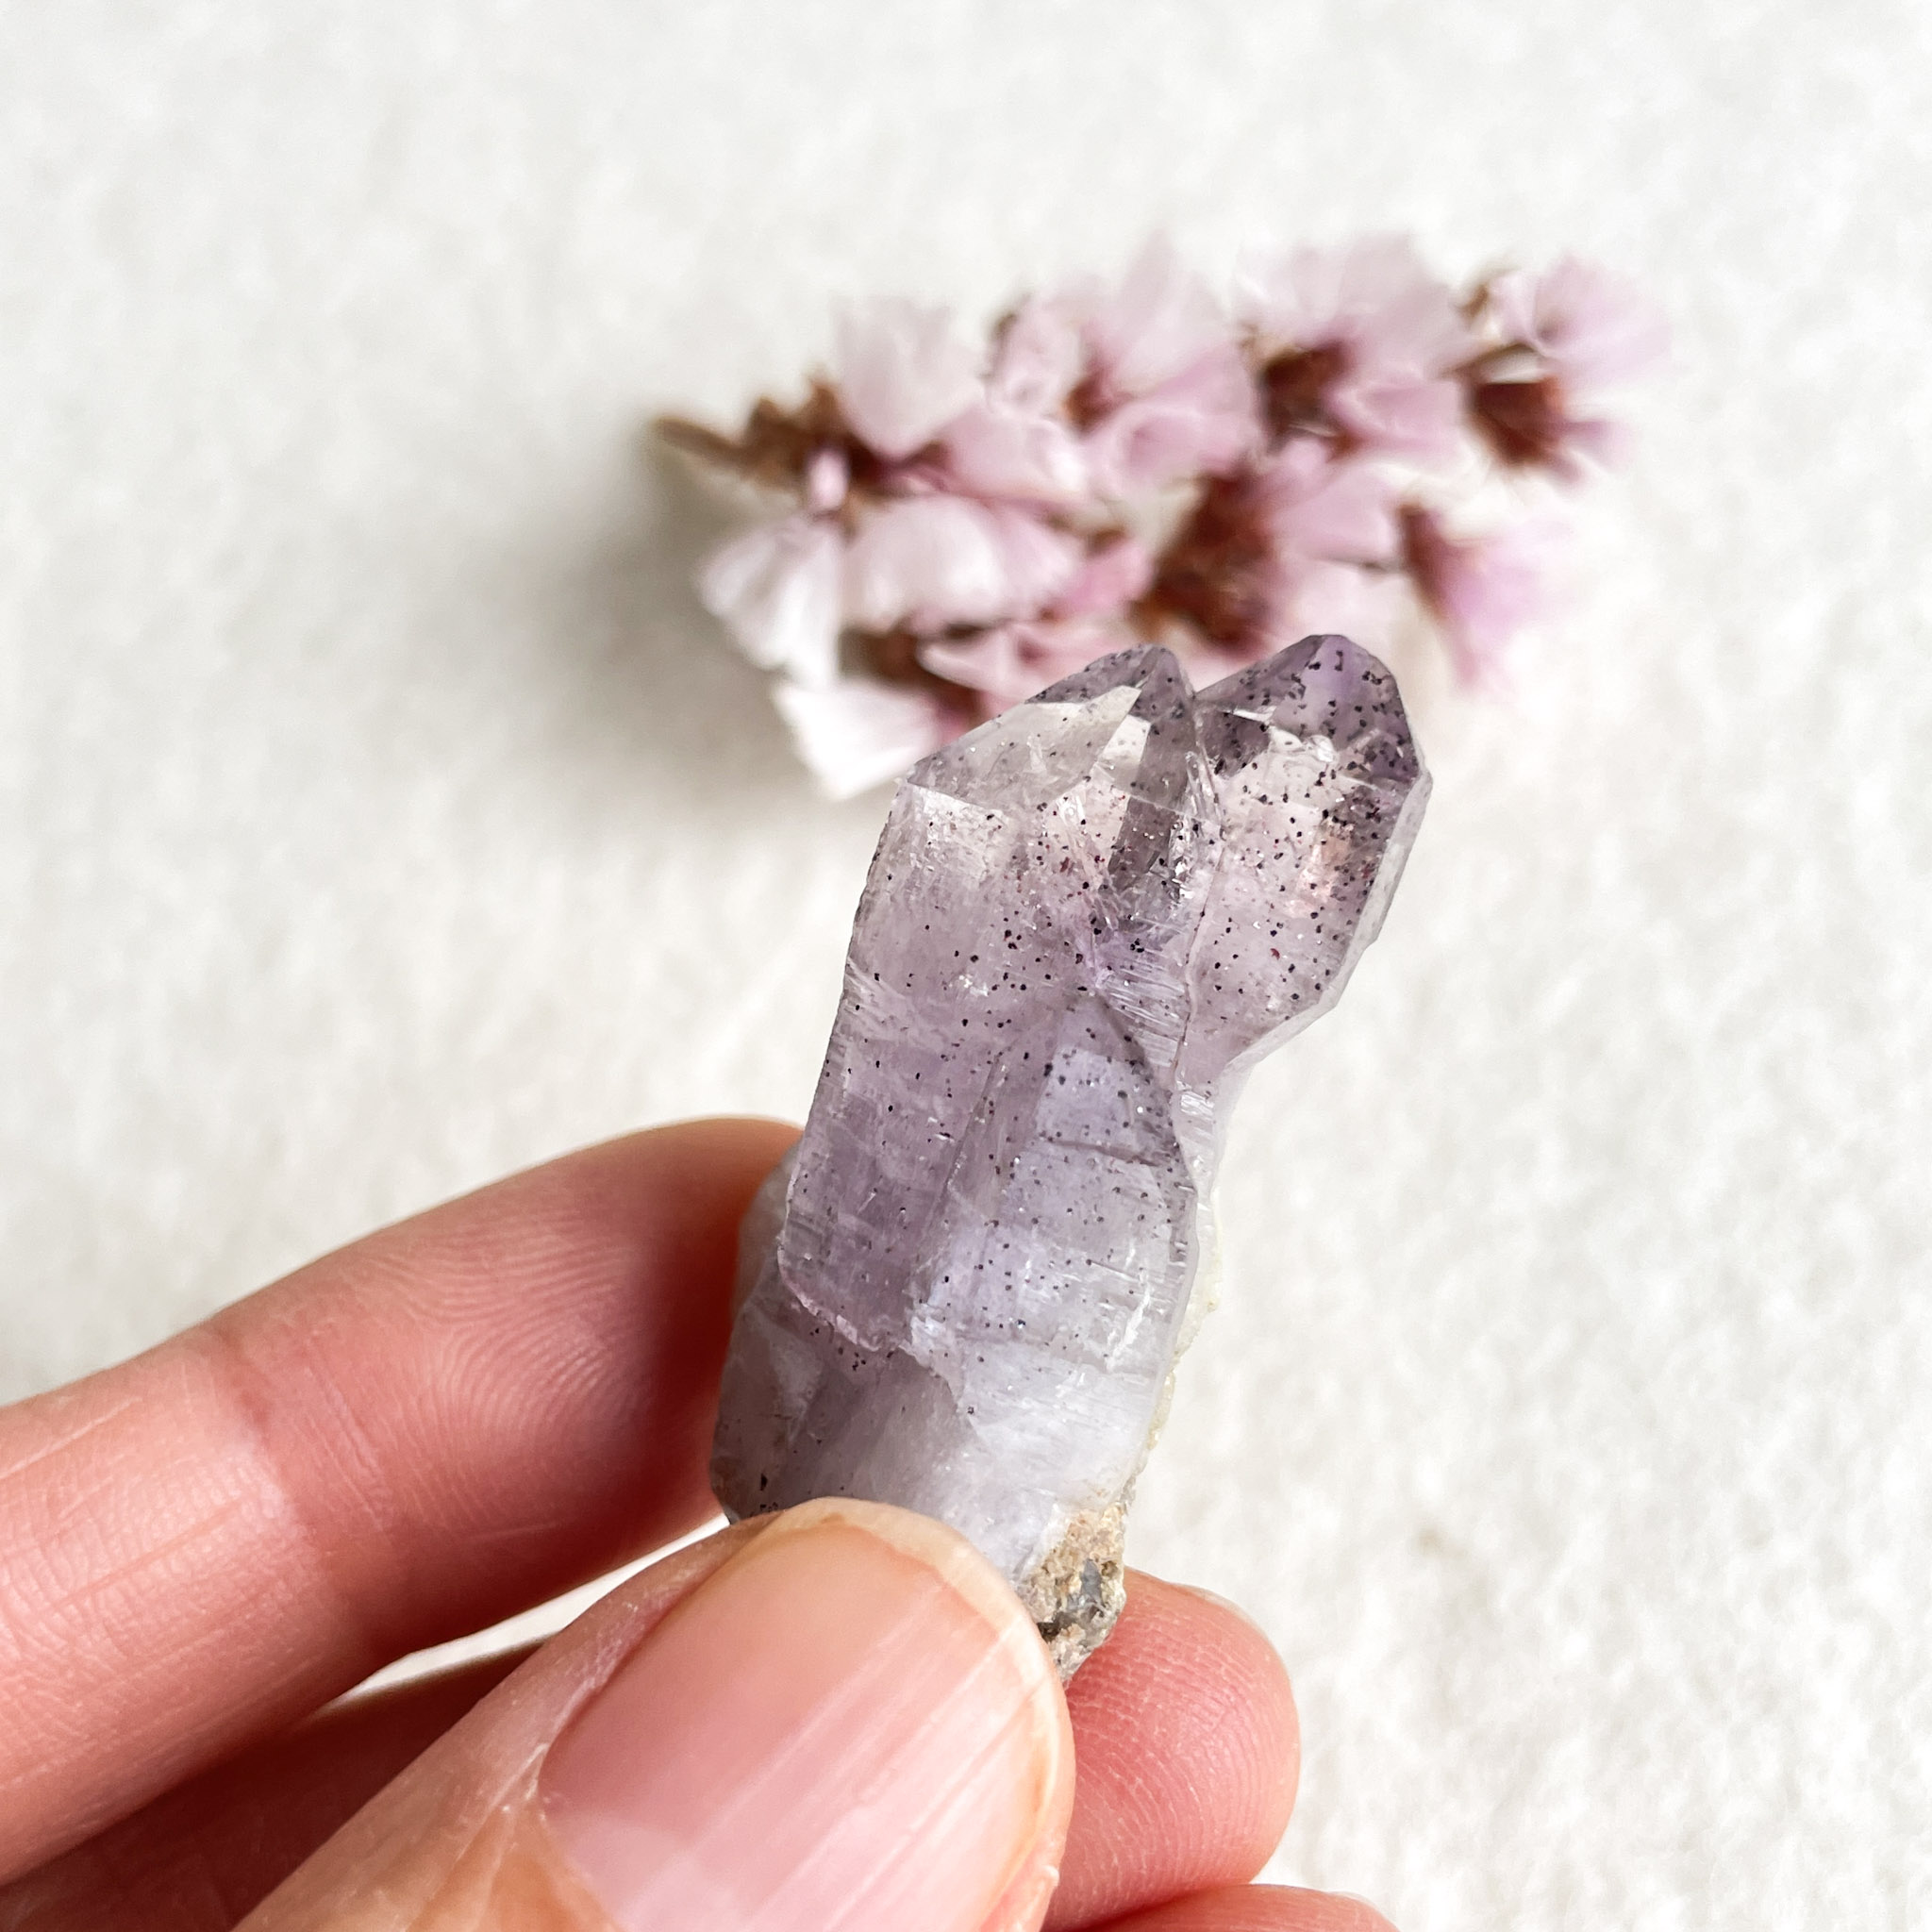 A close-up of a hand holding a translucent, purple-tinted crystal with a blurred background of dried pink flowers.